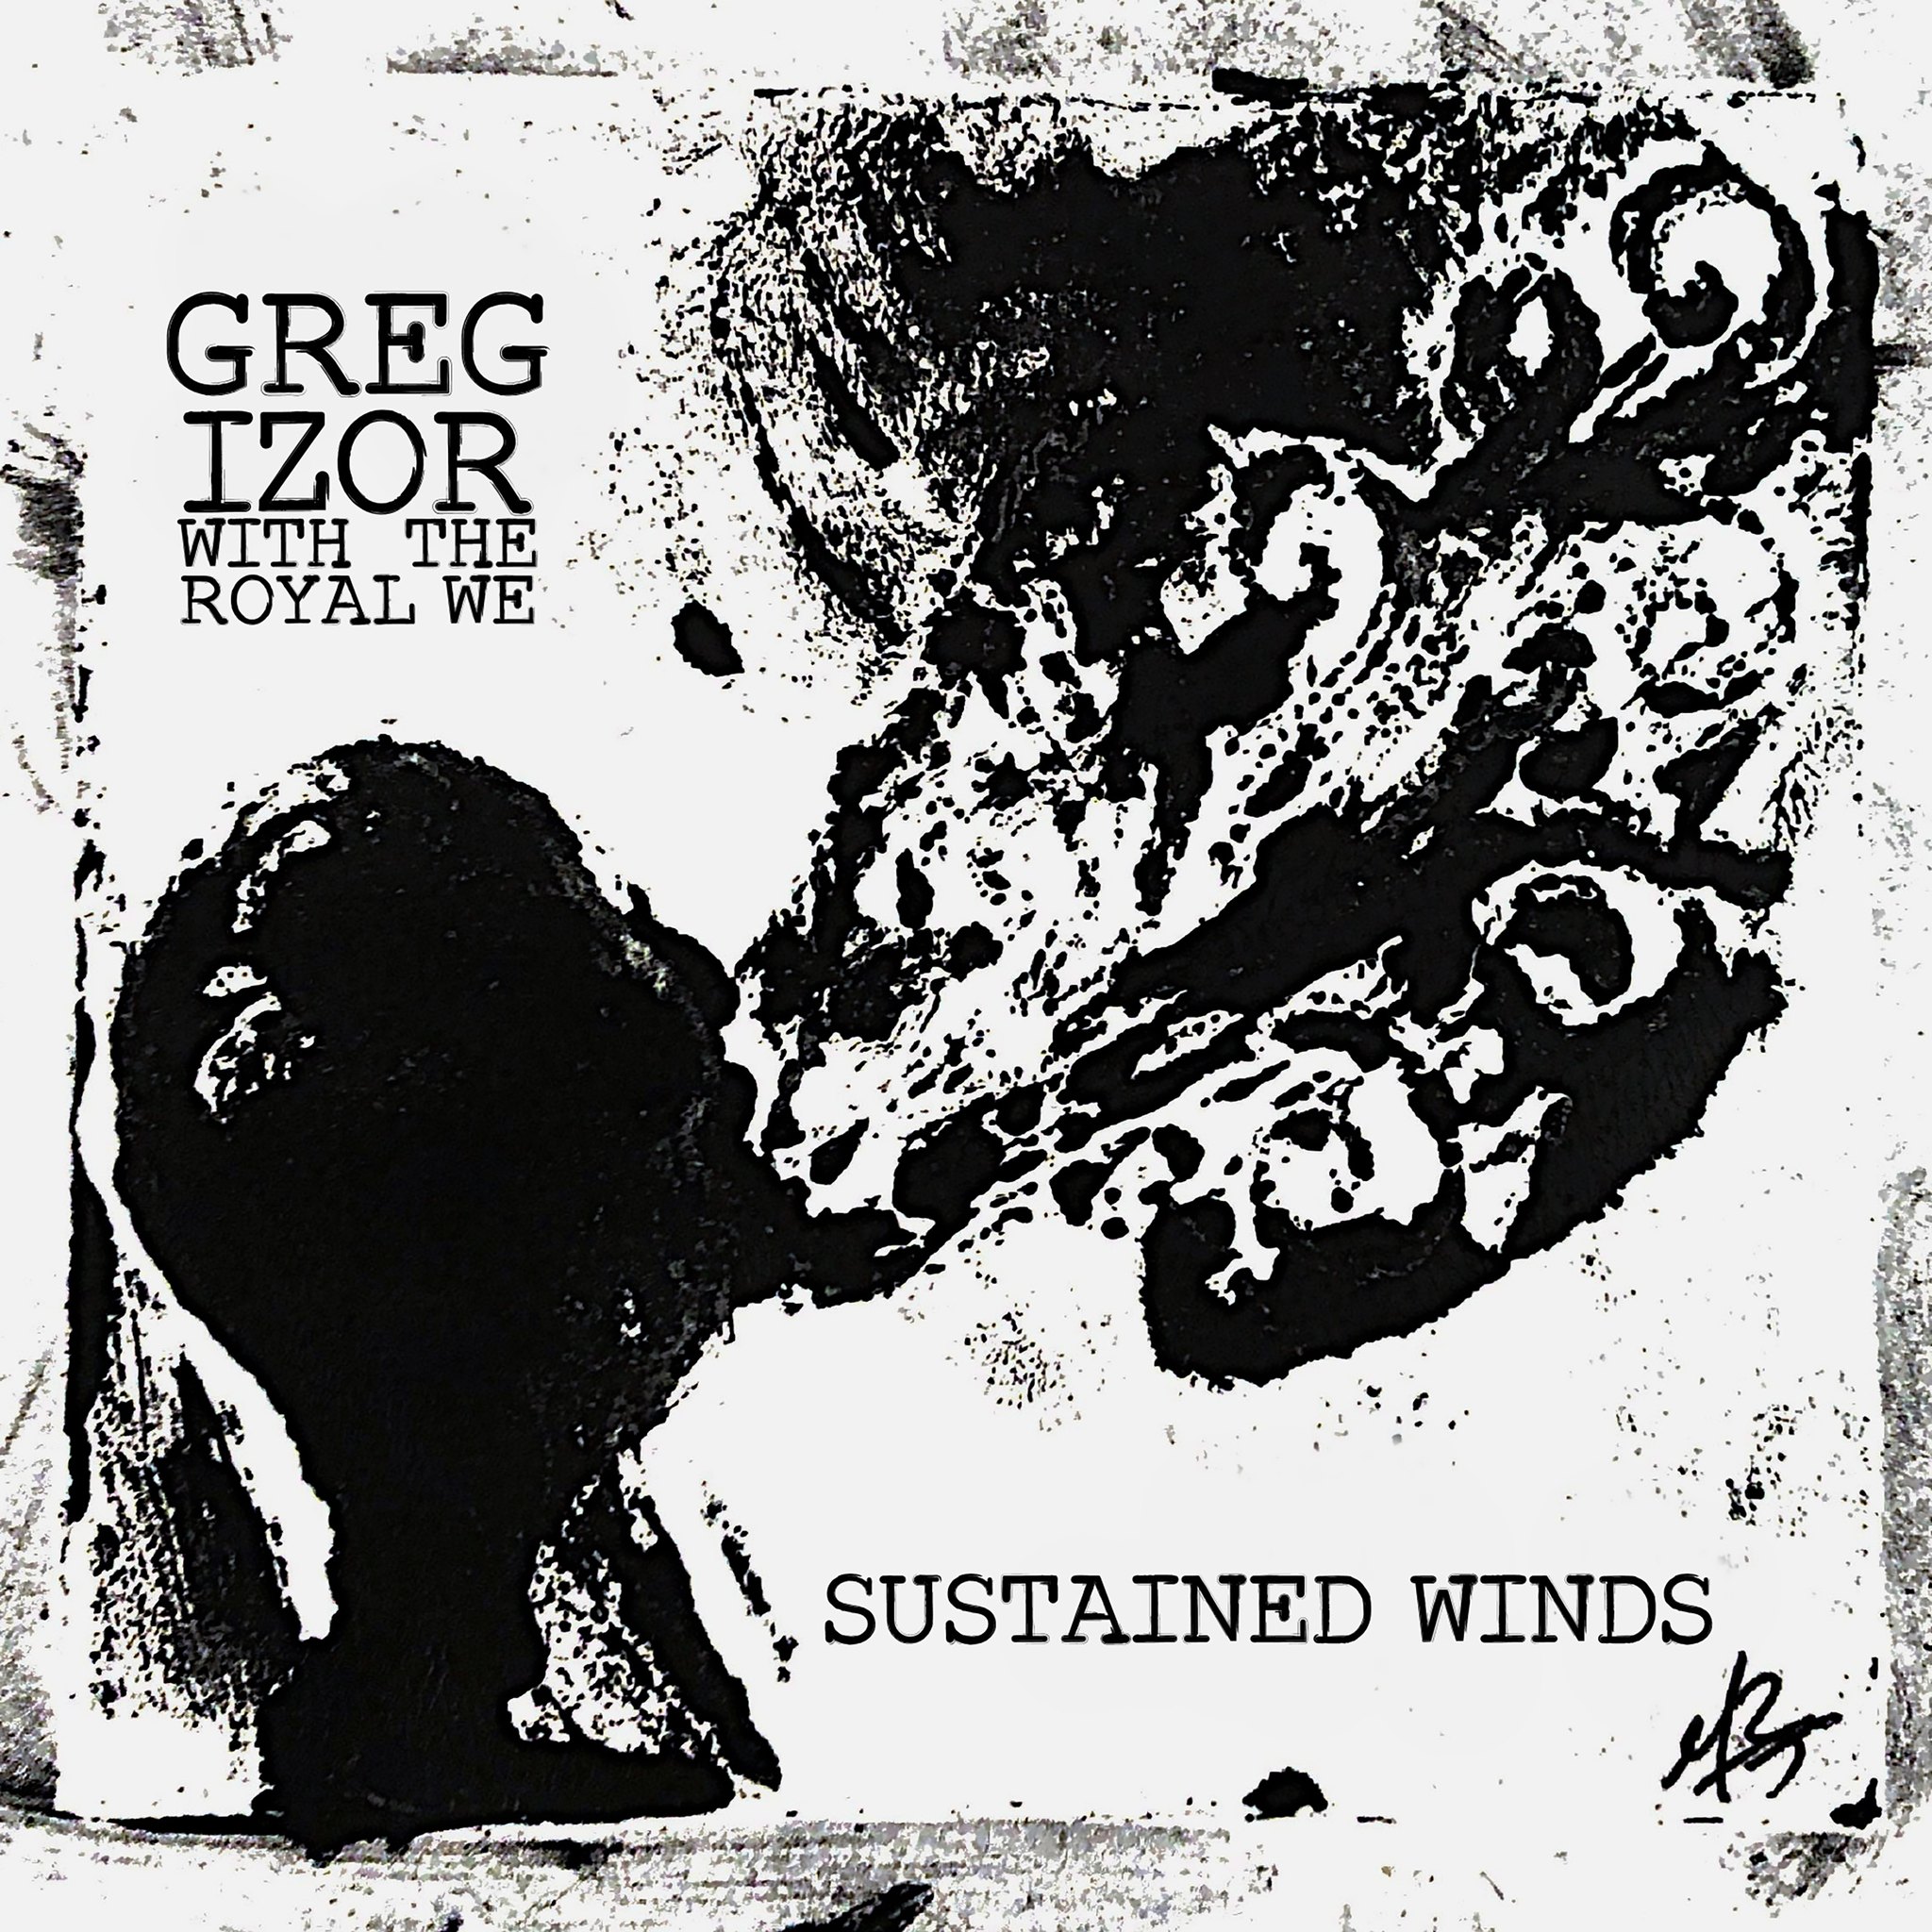 Greg Izor and the Royal We – Sustained Winds